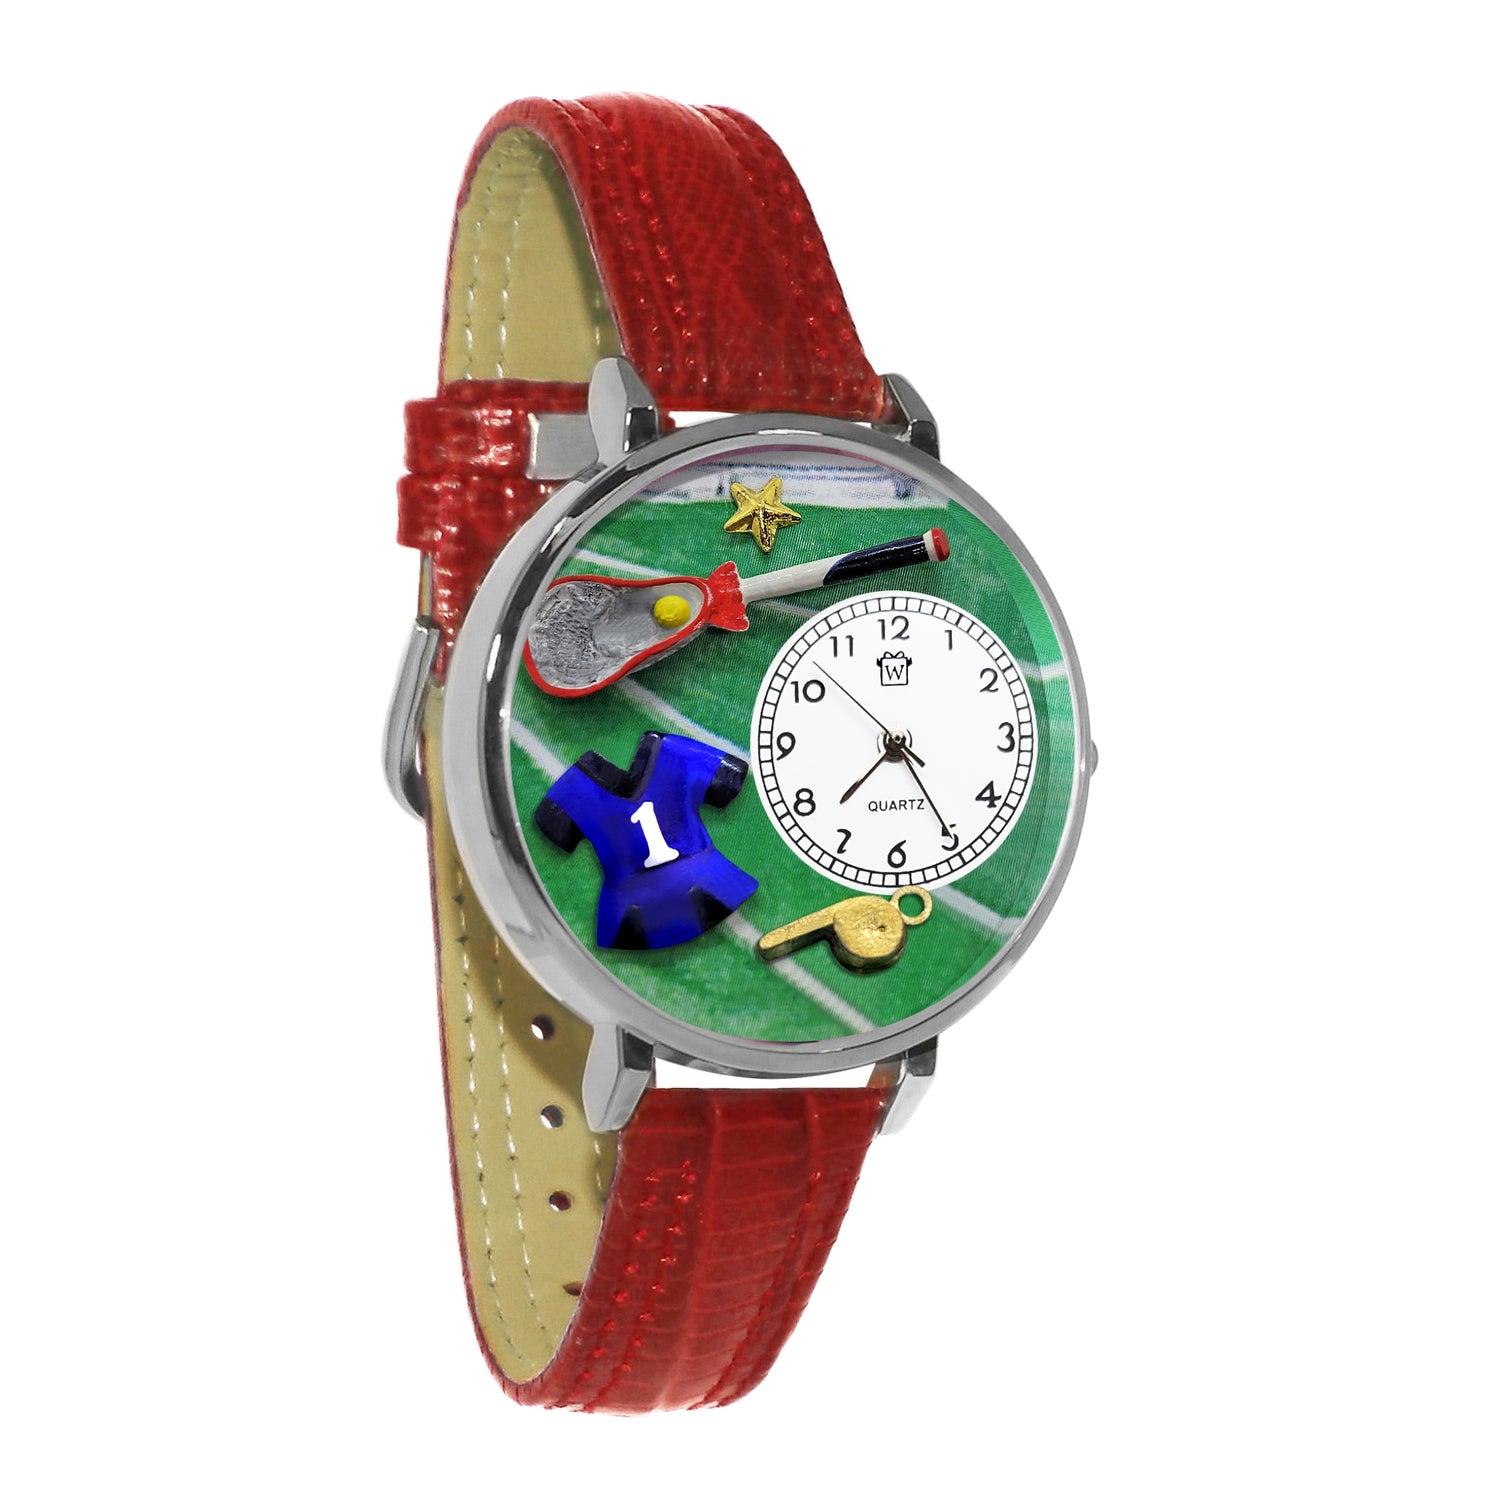 Whimsical Gifts | Lacrosse 3D Watch Large Style | Handmade in USA | Hobbies & Special Interests | Sports | Novelty Unique Fun Miniatures Gift | Silver Finish Skirt Red Leather Watch Band